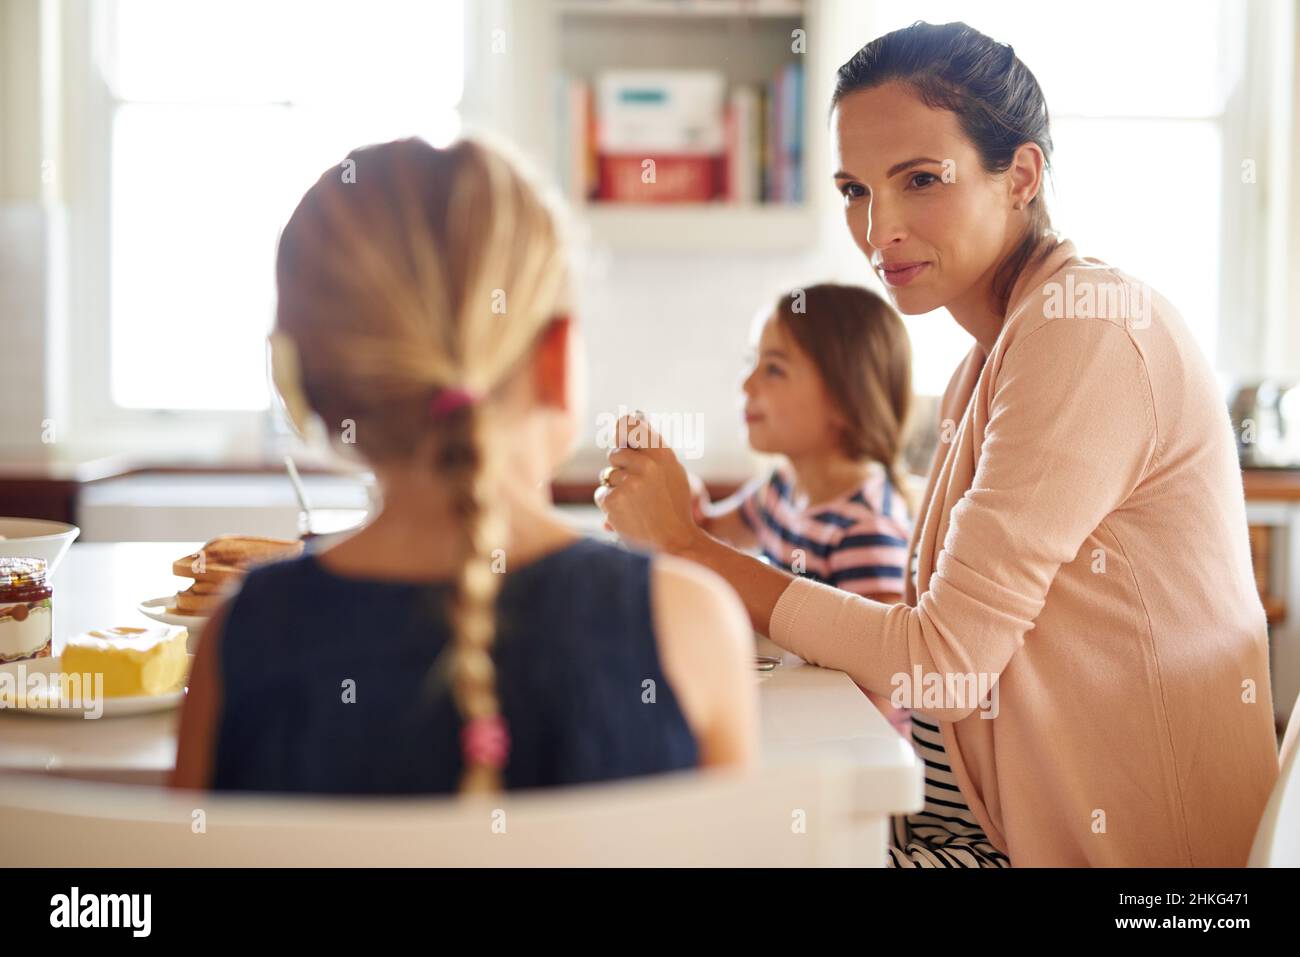 Having fun at the breakfast table. Shot of a family having breakfast together. Stock Photo